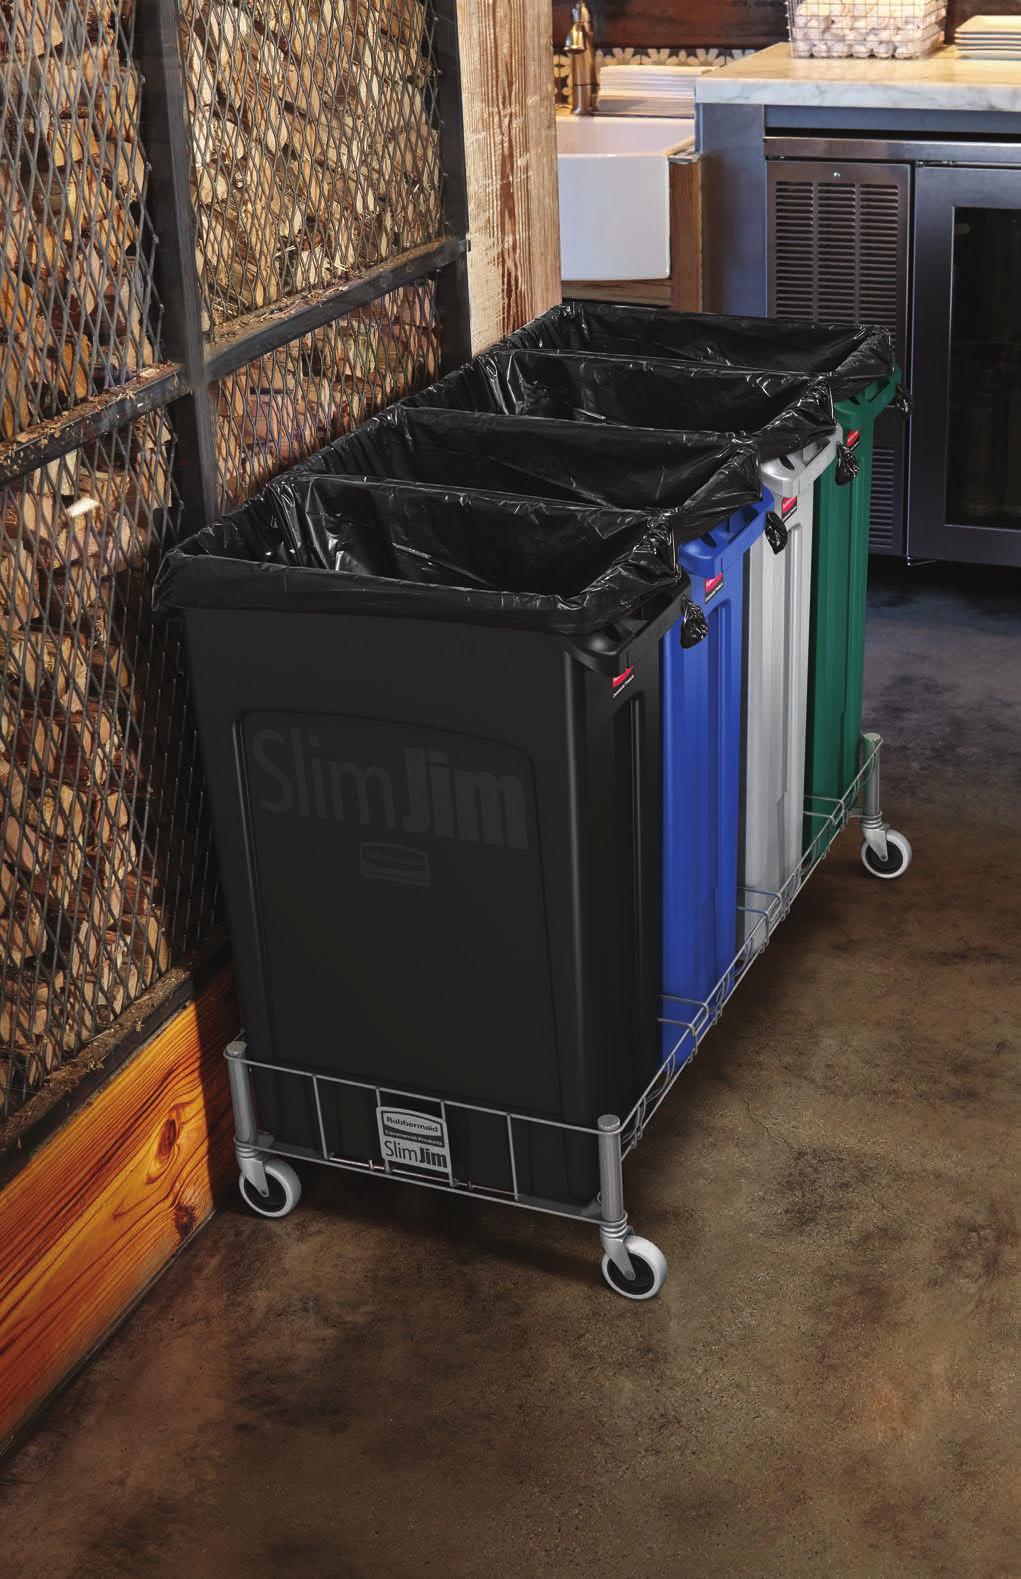 THE SLIM JIM CONTAINER from Rubbermaid Commercial Products delivers the durability needed for commercial environments